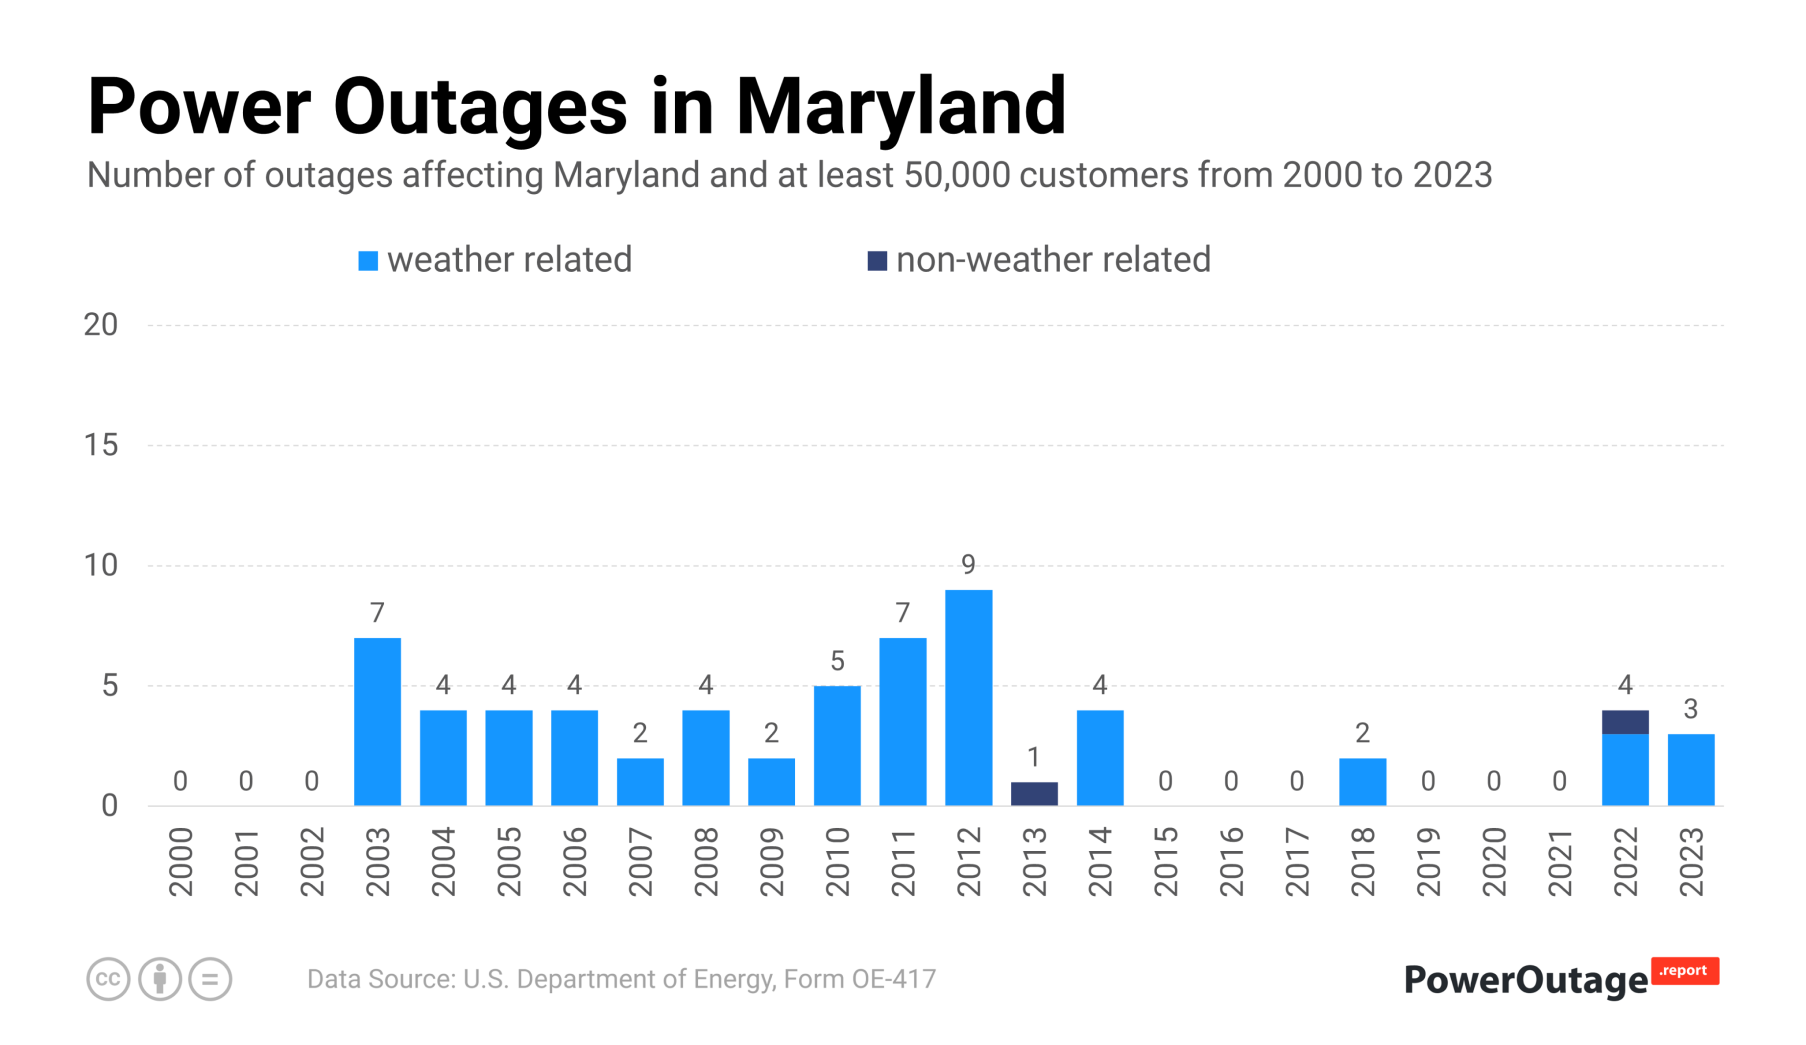 Maryland Power Outage Statistics (2000 - 2021)